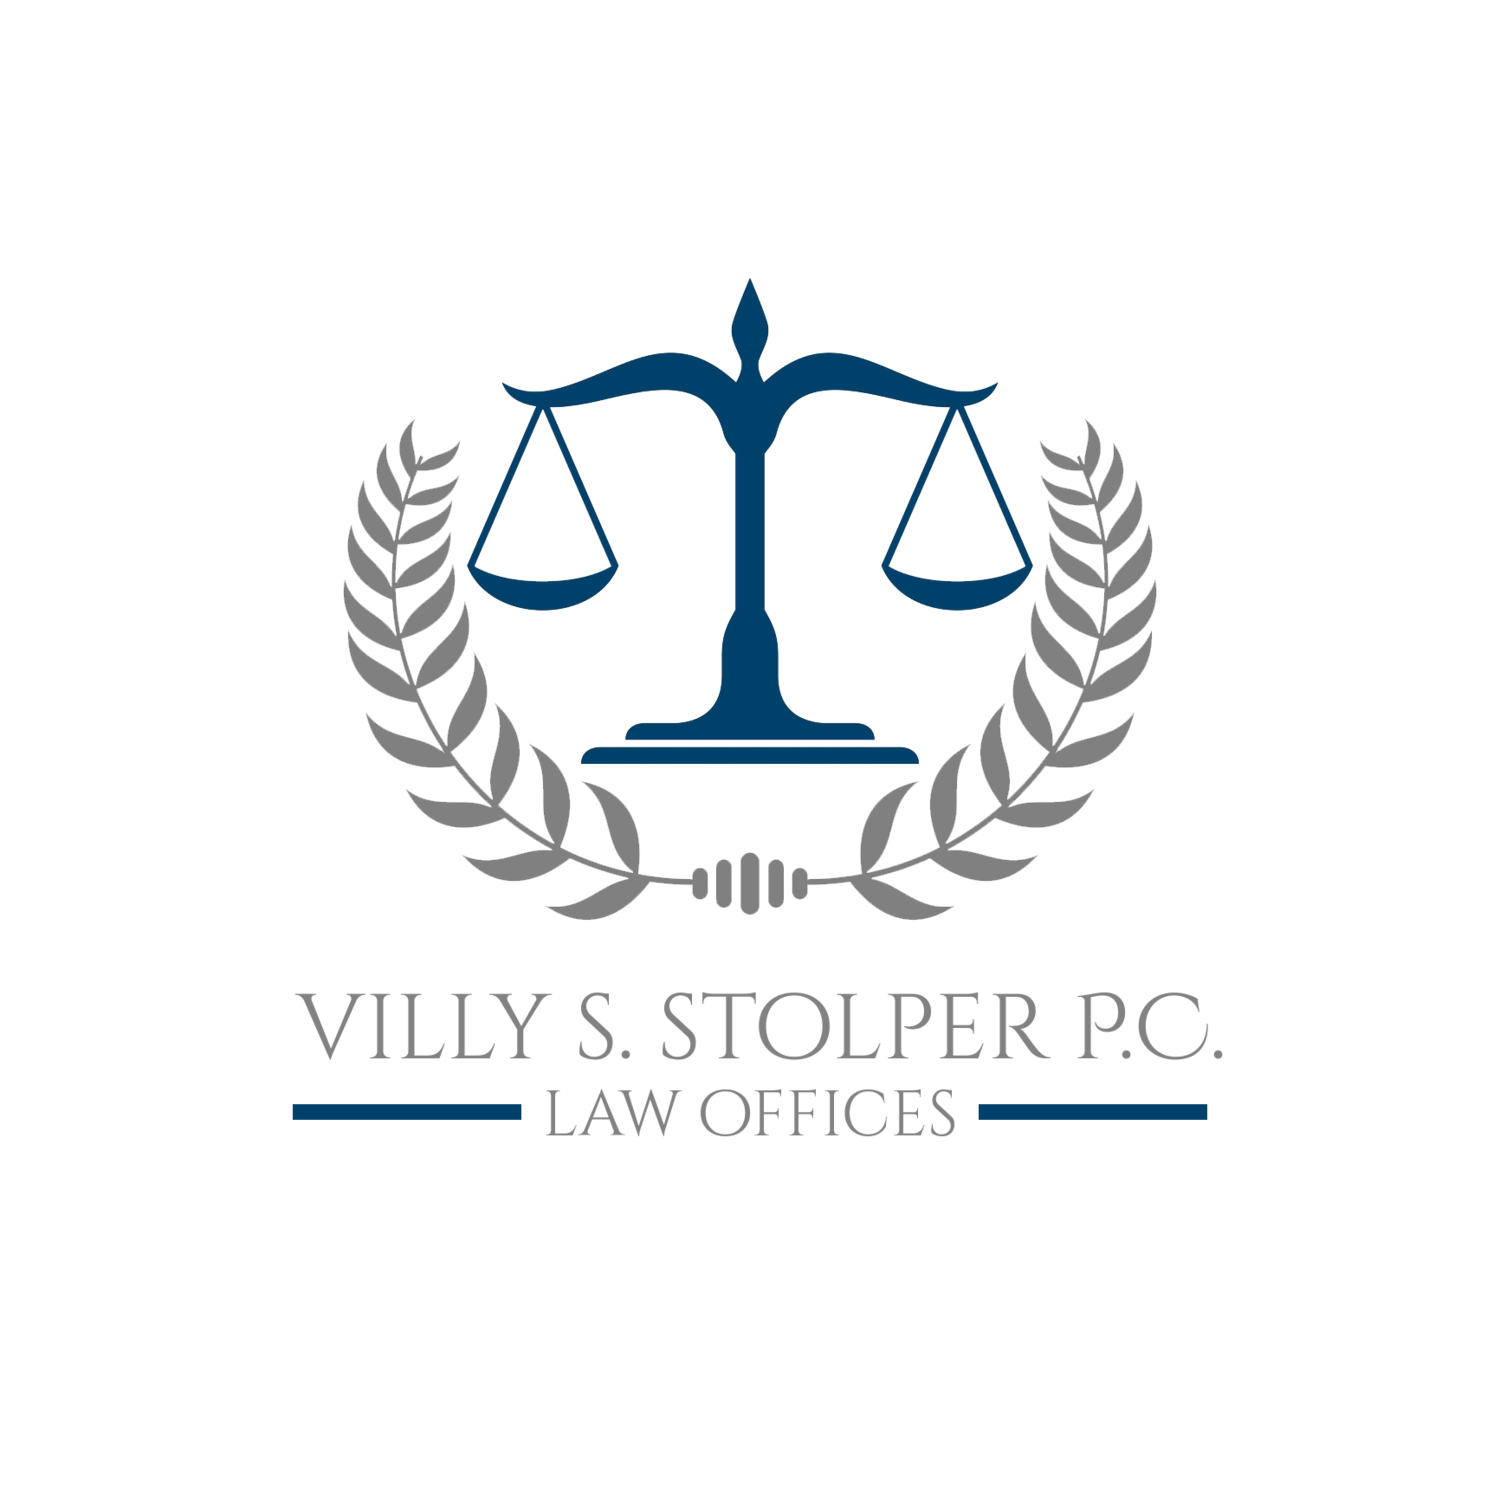 THE LAW OFFICES OF VILLY S. STOLPER, P.C.